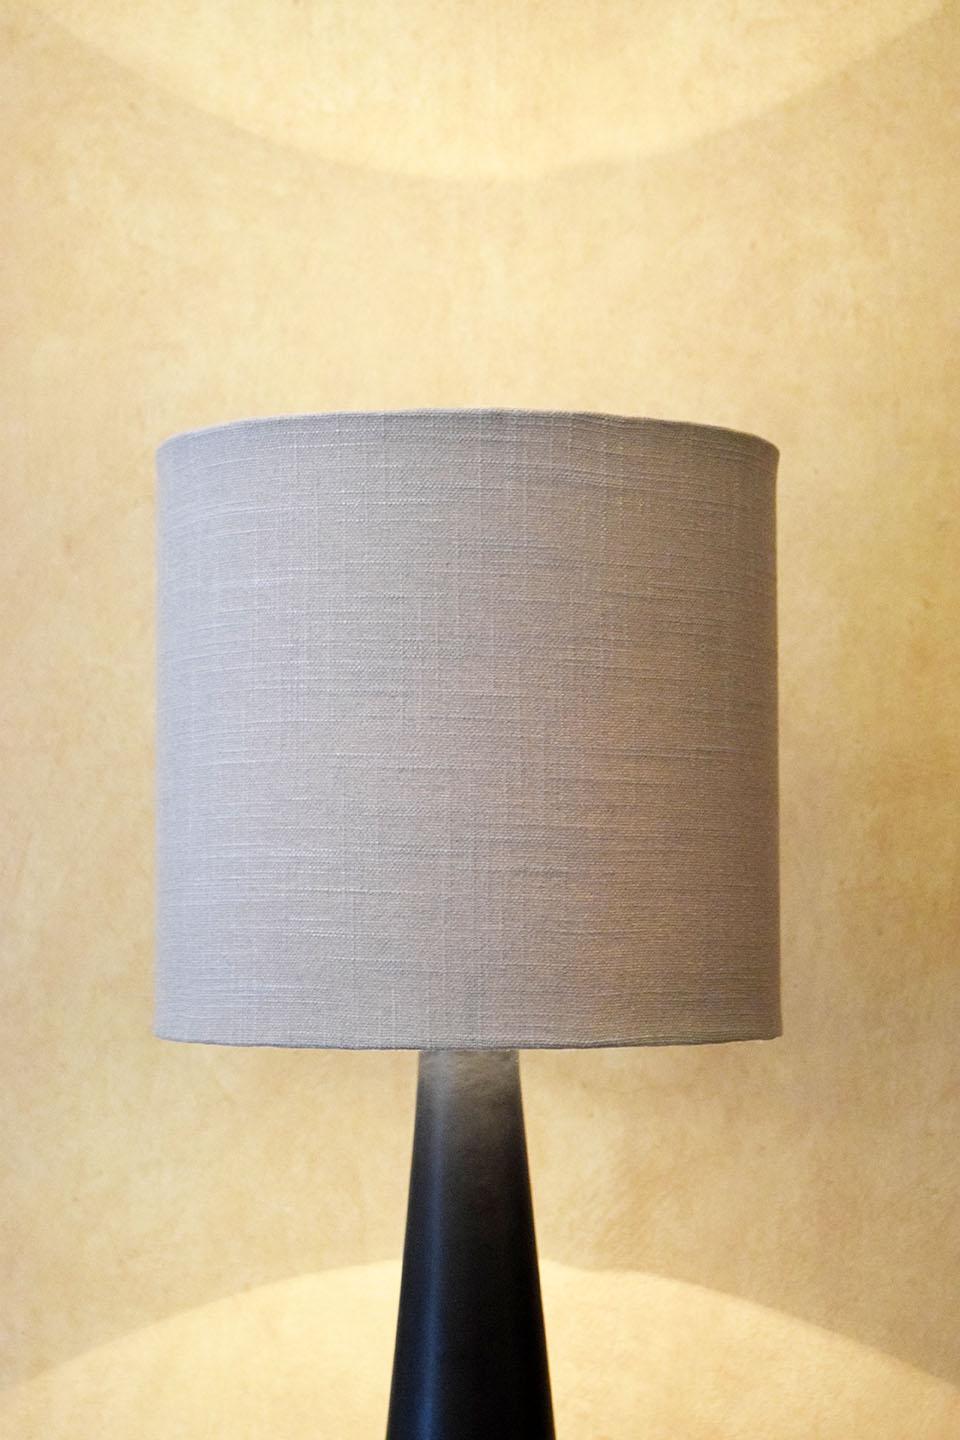 Clean and elegant lines. The base is made of ceramic and the shade is made of linen.
Timeless looks. Warm light.